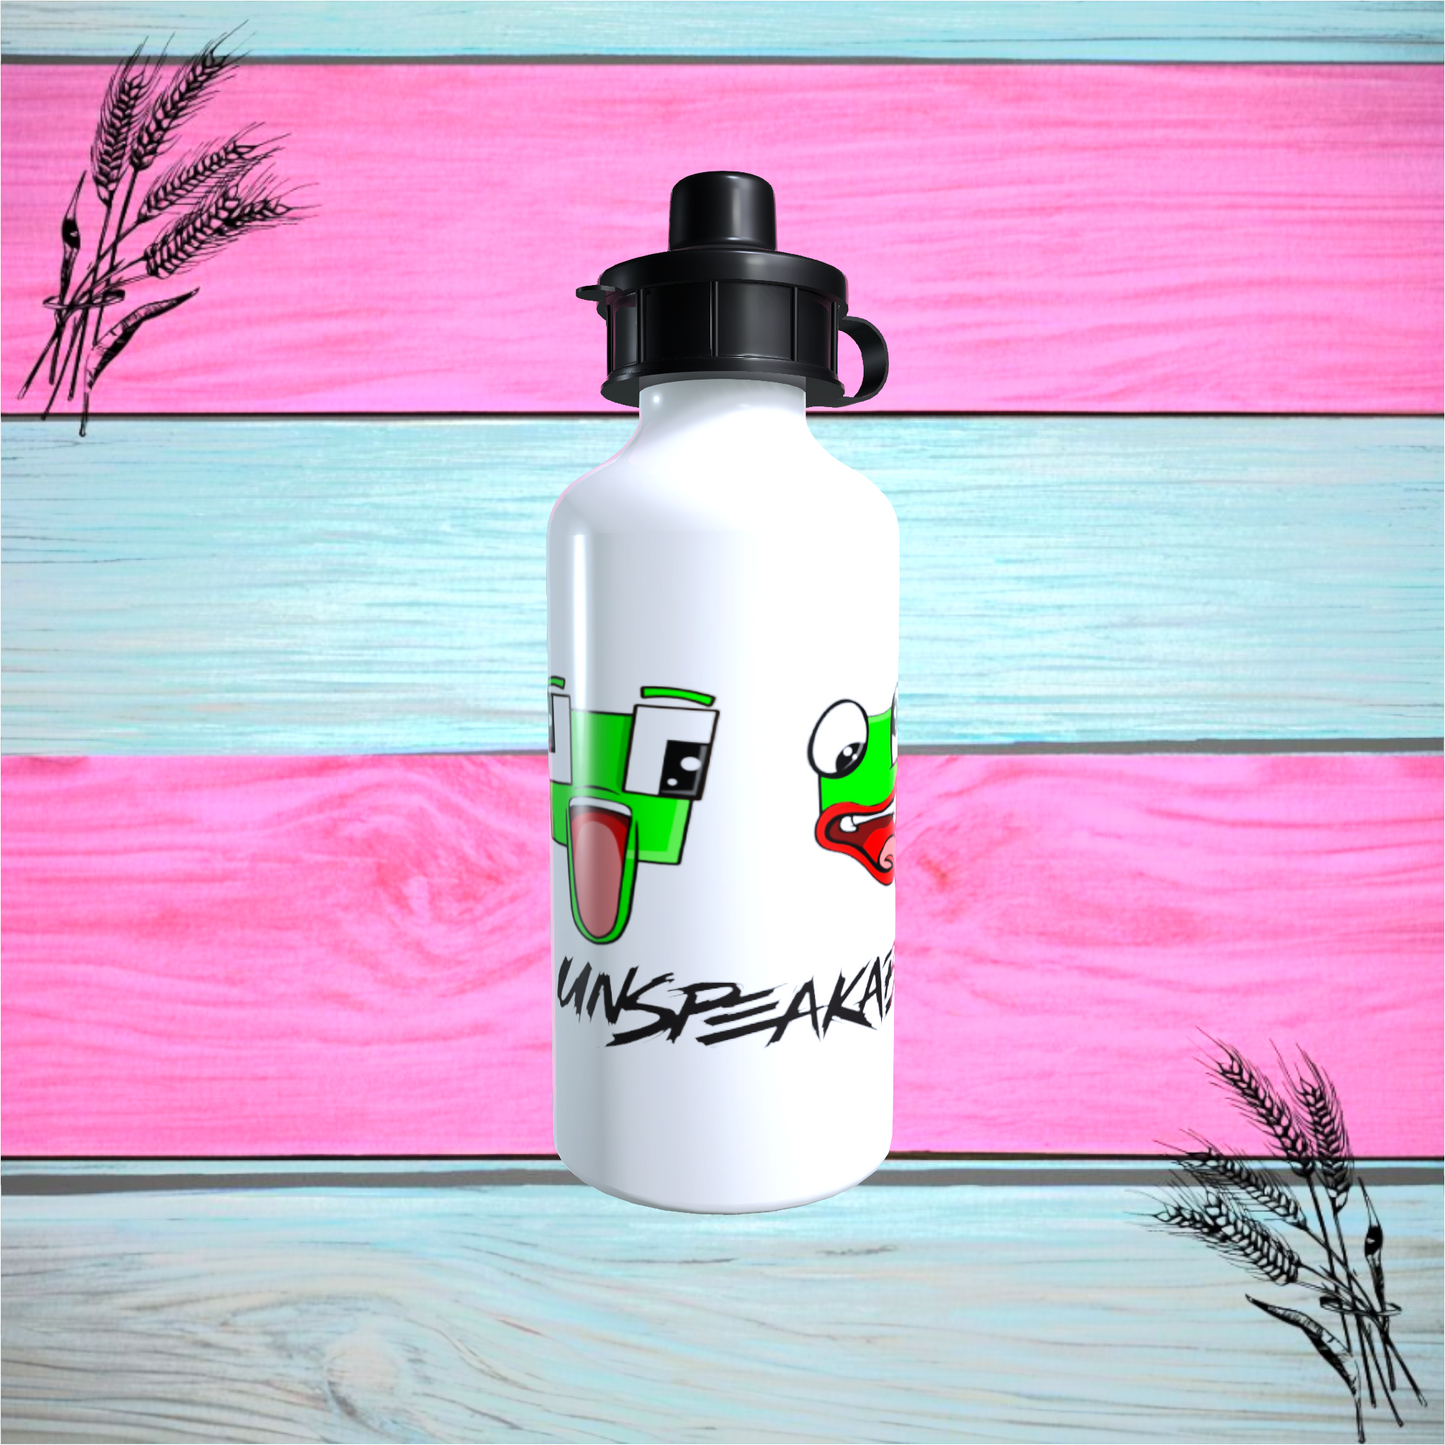 Printed 600ml Unspeakable Aluminium Water Bottle, Available In White Or Silver